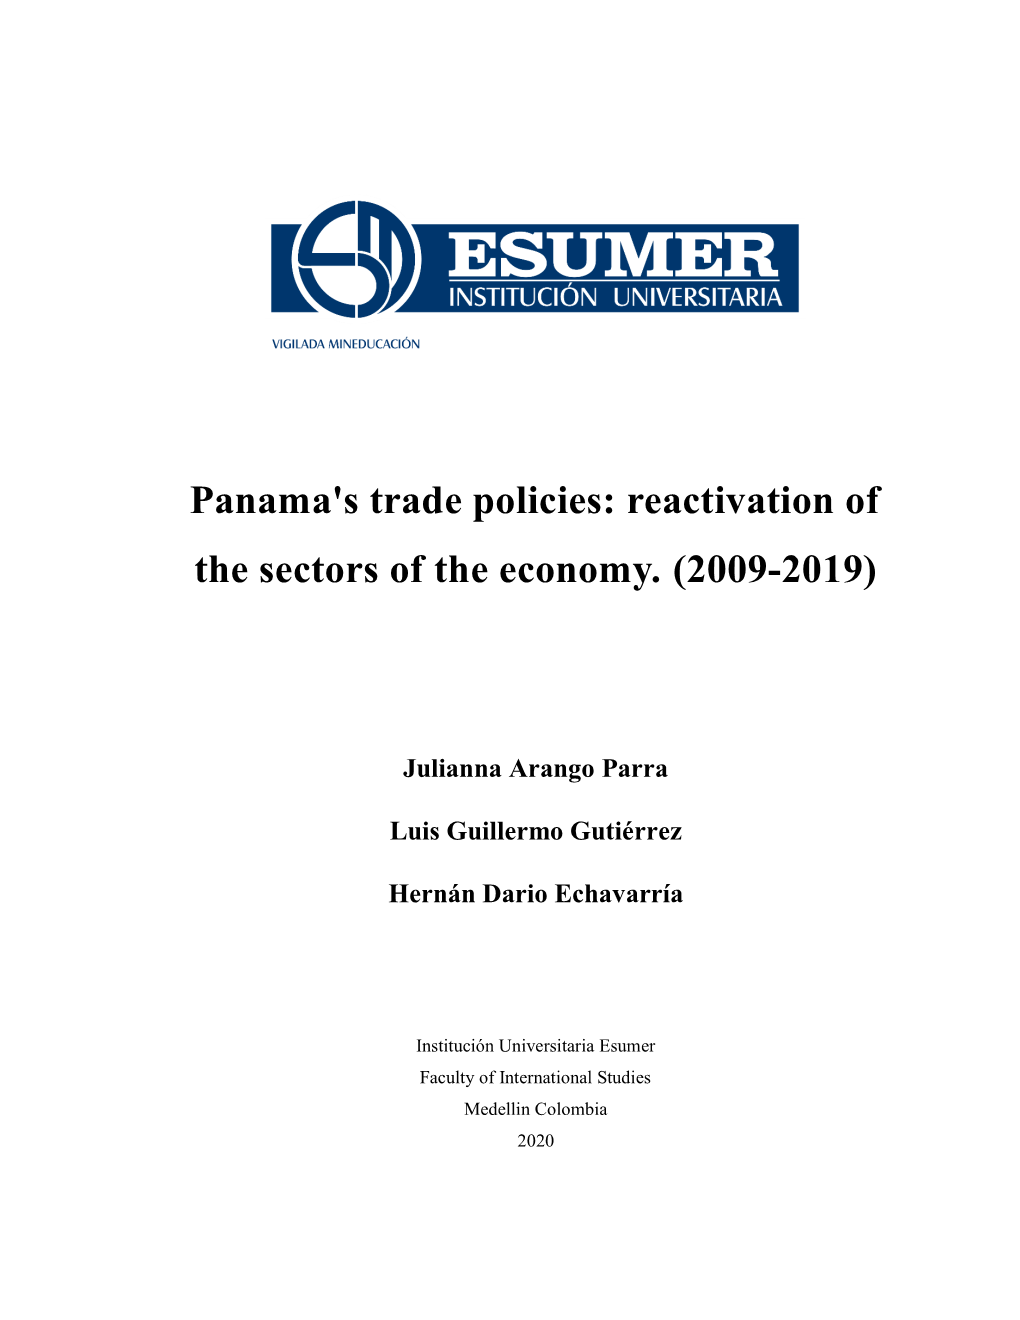 Panama's Trade Policies: Reactivation of the Sectors of the Economy